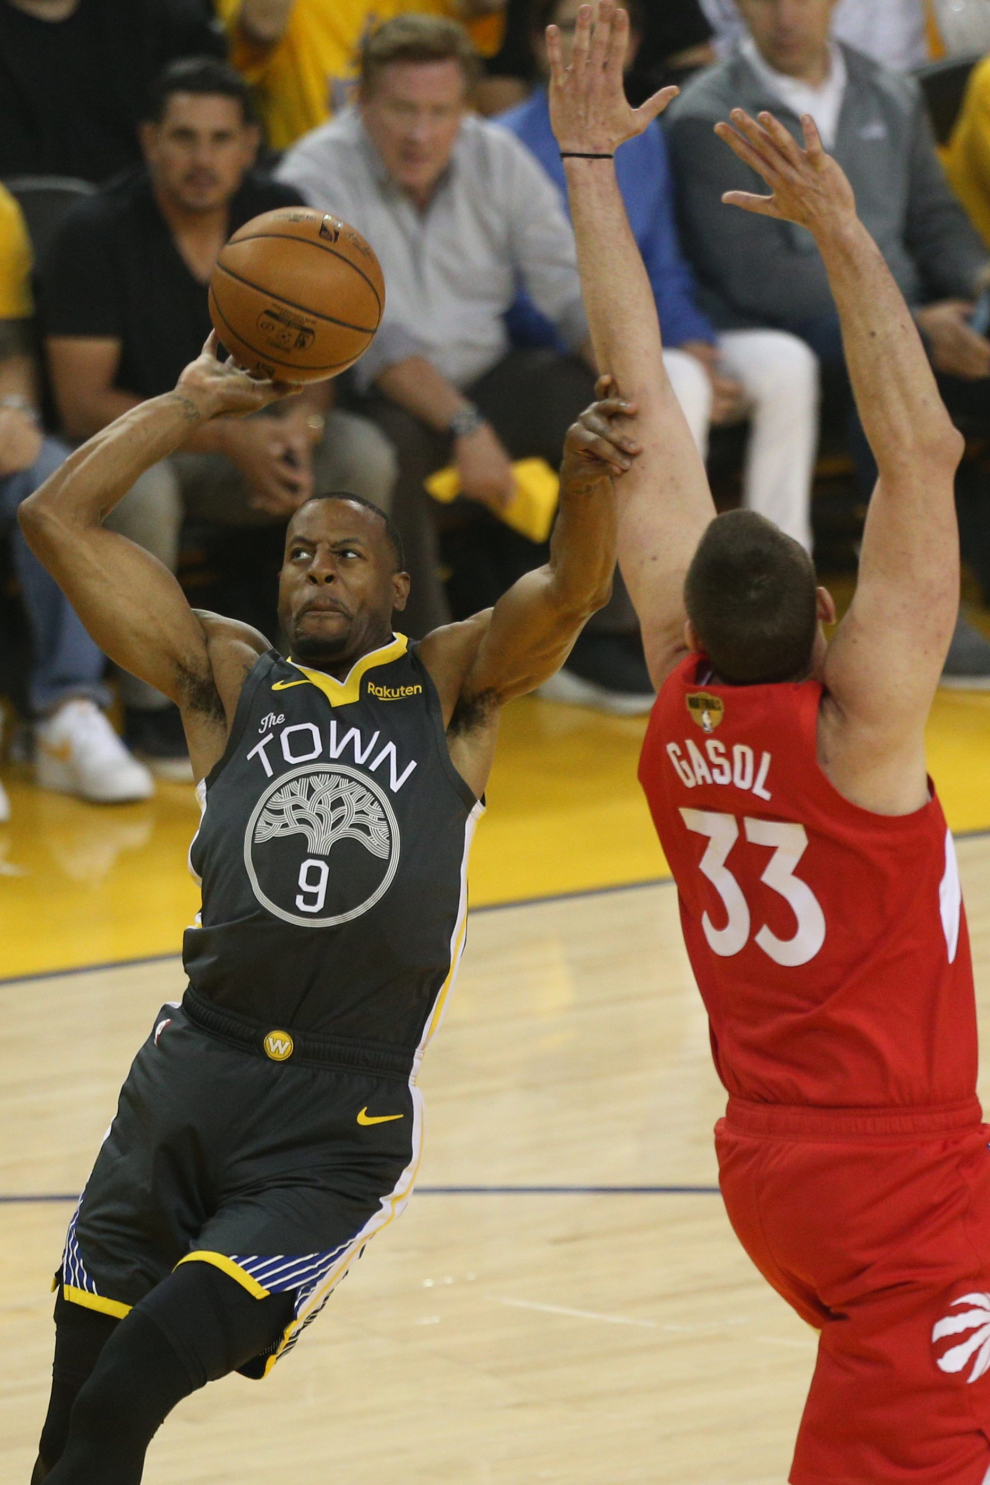 Jun 13, 2019; Oakland, CA, USA; Golden State Warriors guard Andre Iguodala (9) shots a shot while Toronto Raptors center Marc Gasol (33) defends during the first half in game six of the 2019 NBA Finals at Oracle Arena. Mandatory Credit:Cary Edmondson-USA TODAY Sports [[[REUTERS VOCENTO]]] BASKETBALL-NBA-GSW-TOR/